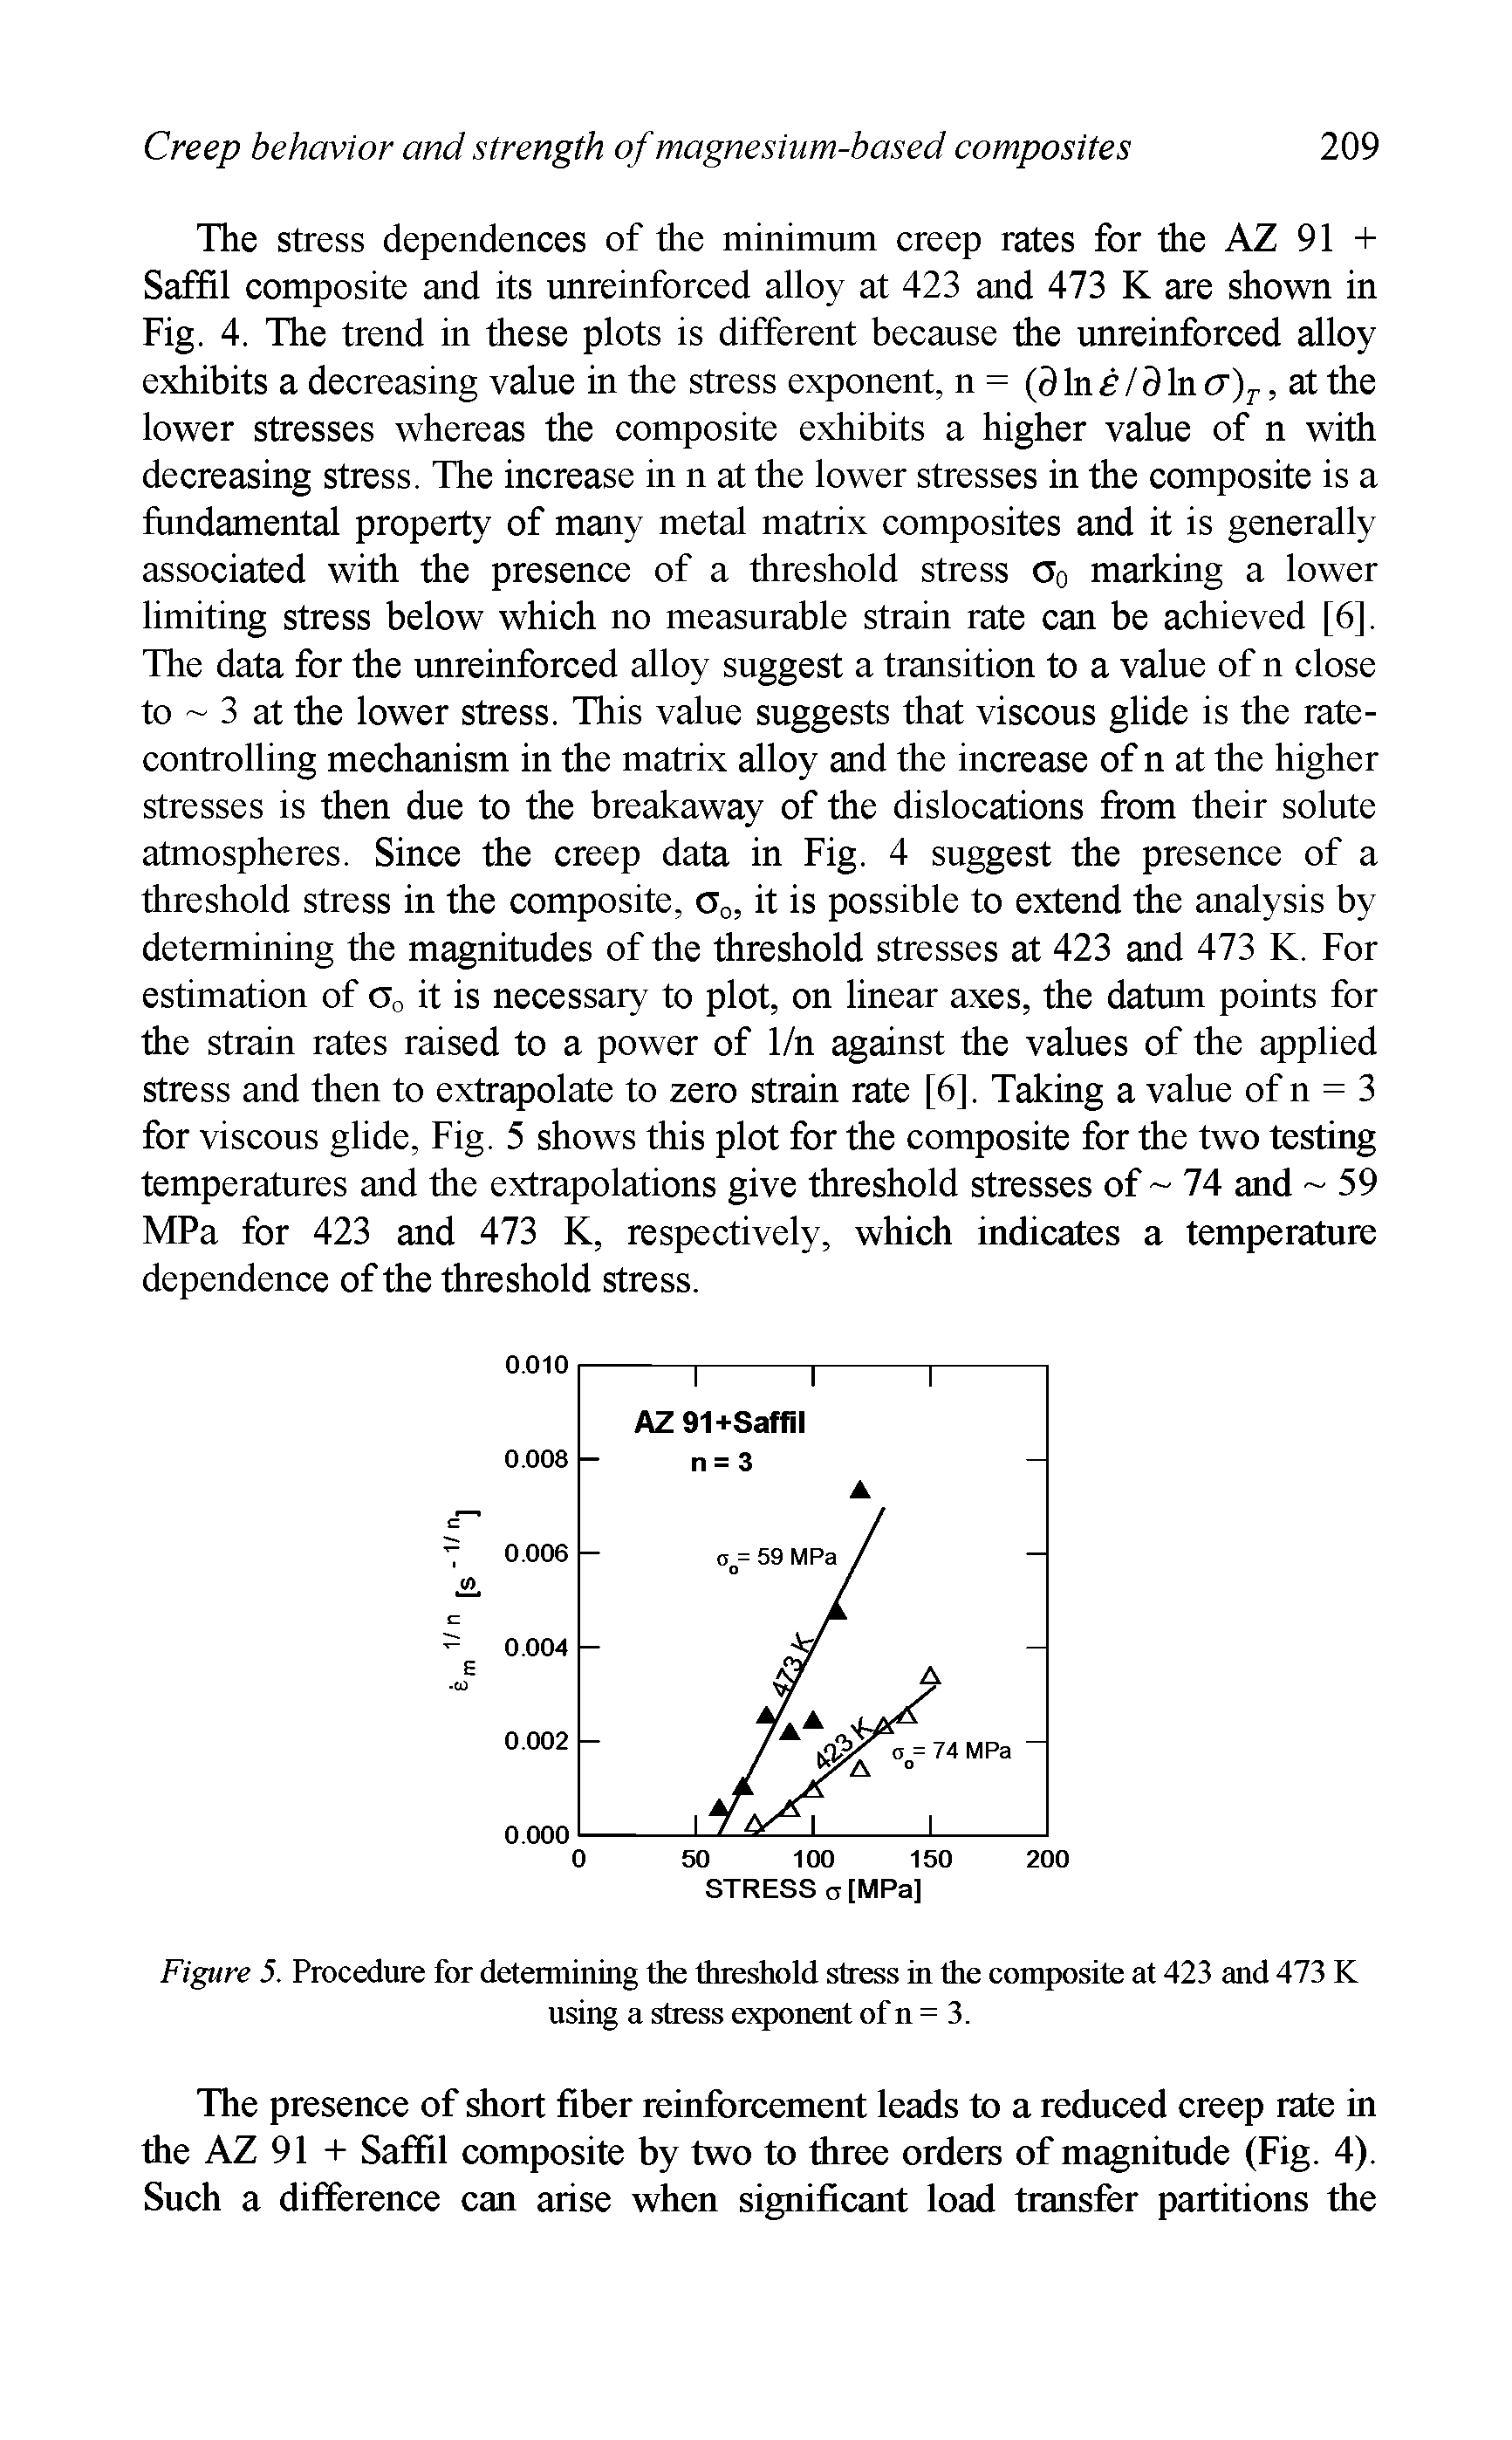 Figure 5. Procedure for determining the threshold stress in the composite at 423 and 473 K using a stress exponent of n = 3.